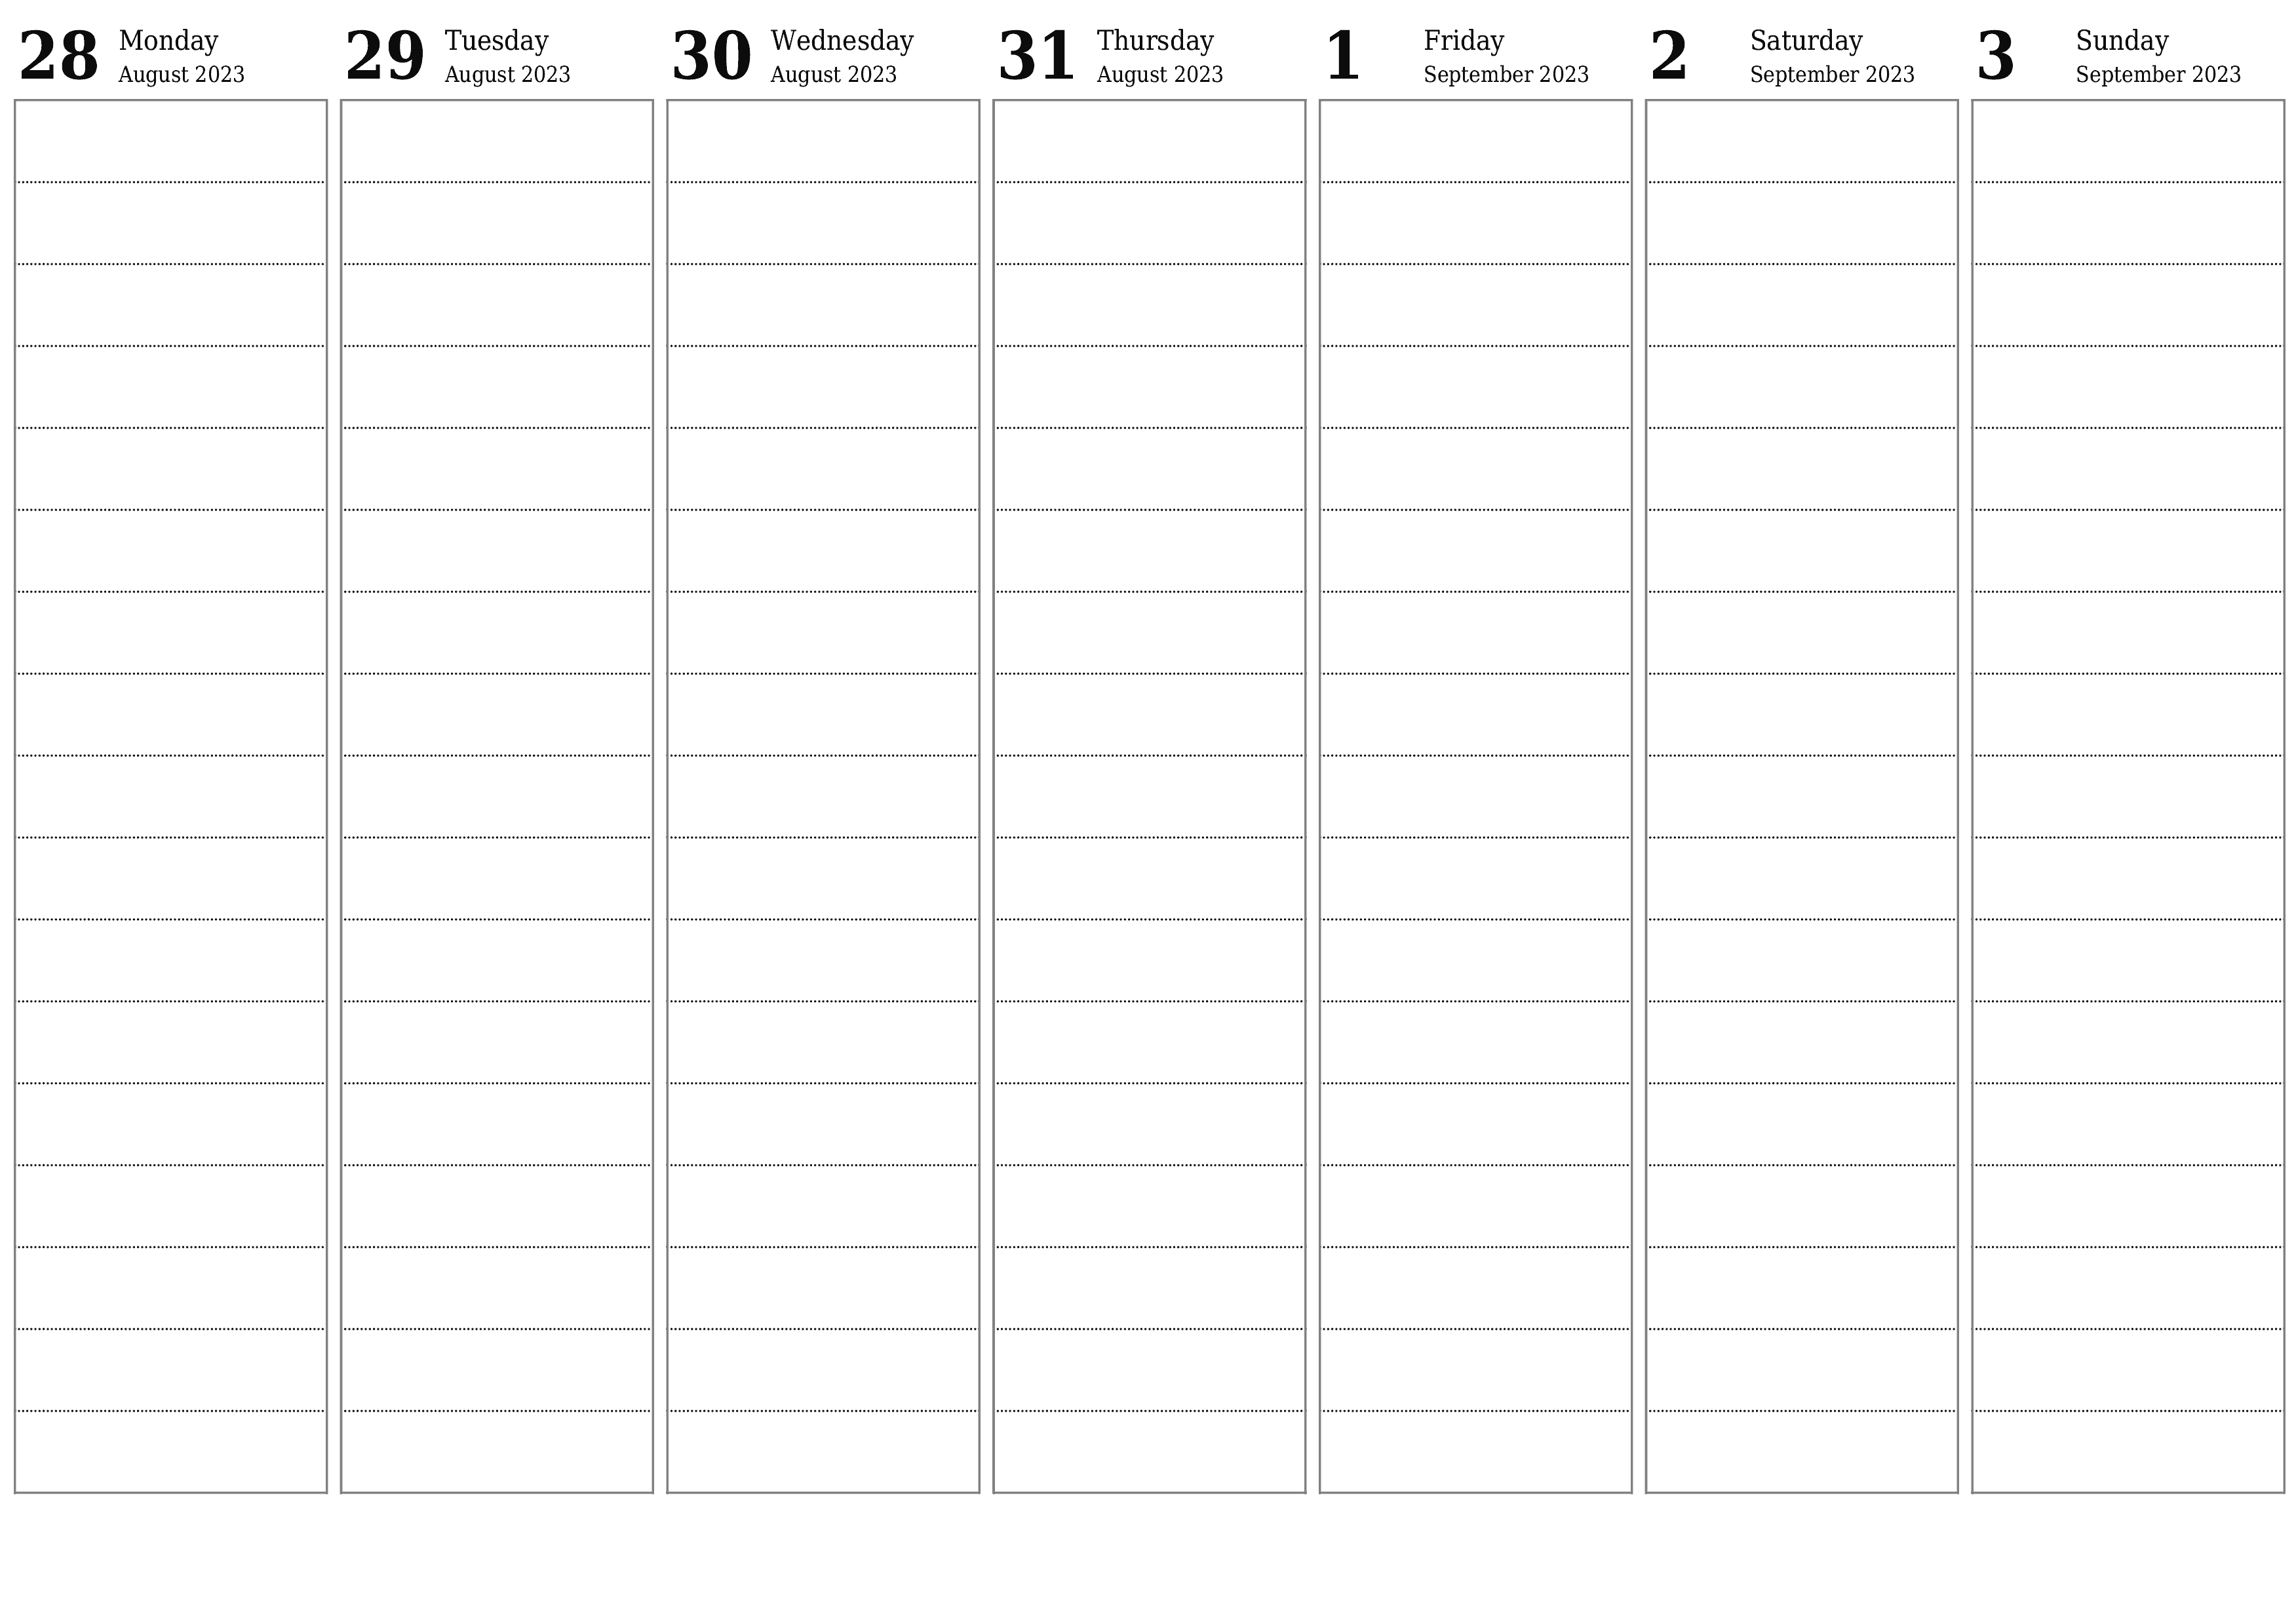 Blank weekly printable calendar and planner for week September 2023 with notes, save and print to PDF PNG English - 7calendar.com